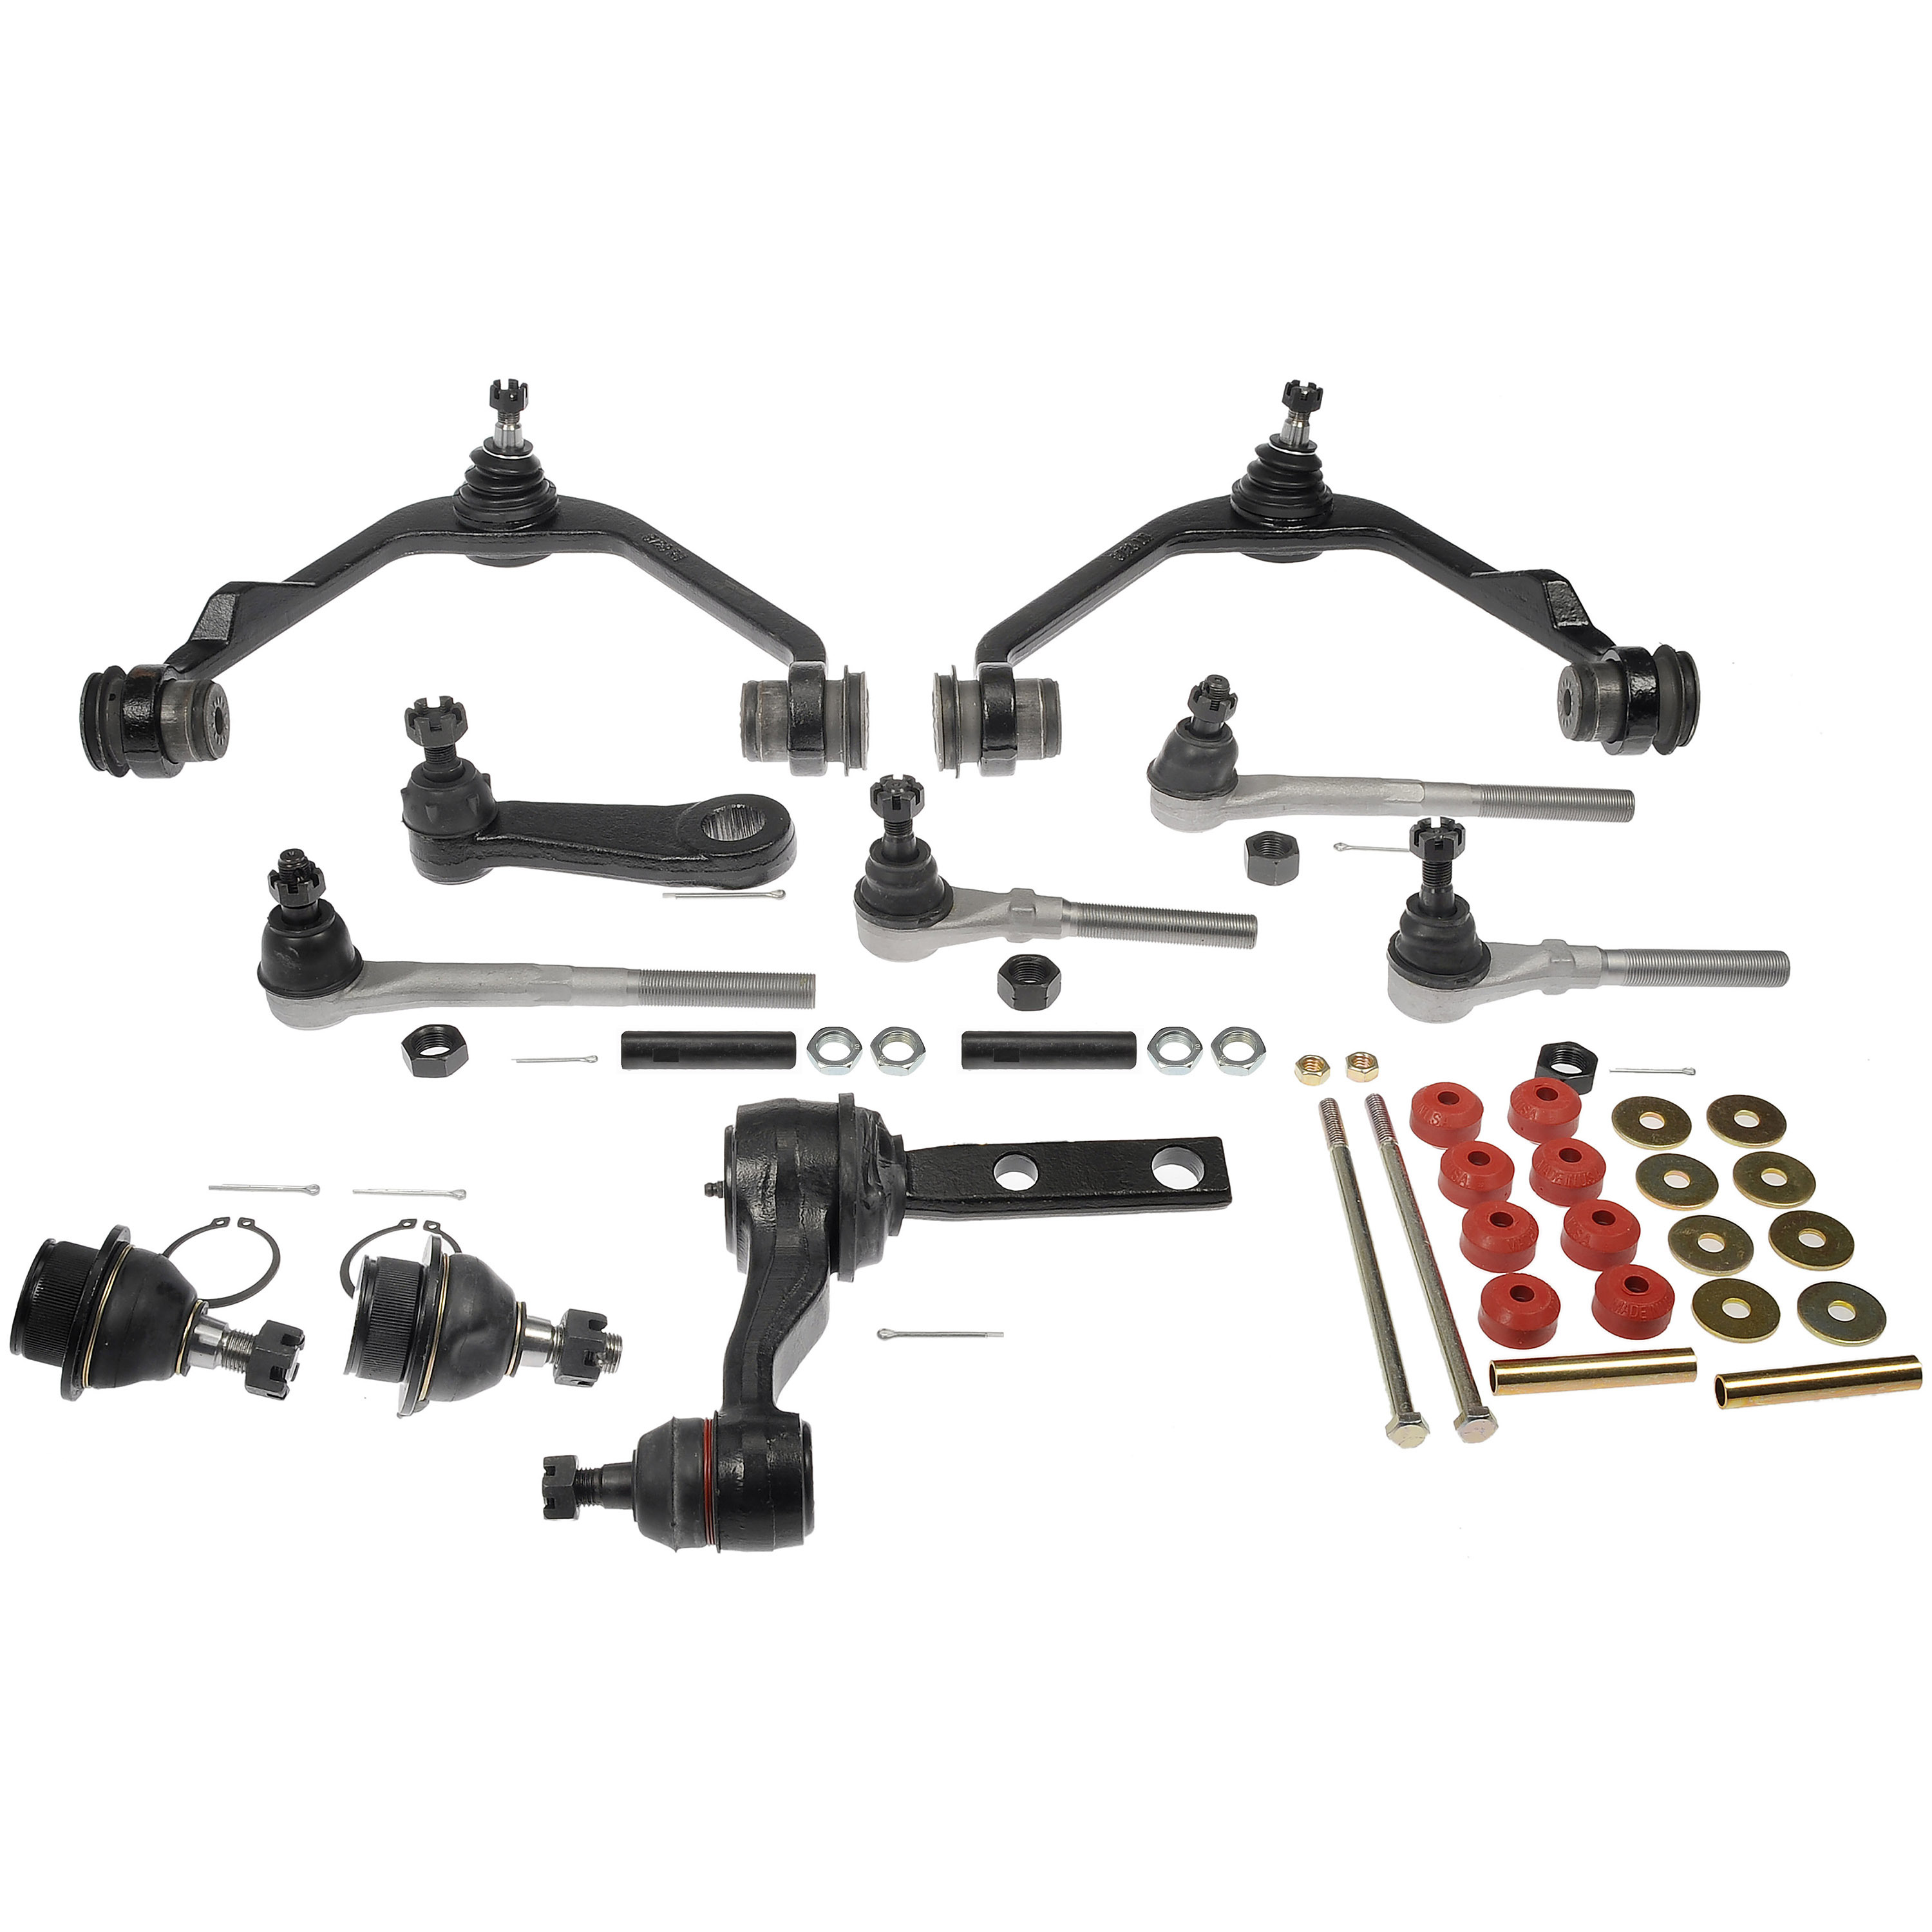 Dorman FEK87029XL Front Suspension Kit for Specific Ford / Lincoln Models Fits select: 1997-2003 FORD F150, 1997-2002 FORD EXPEDITION - image 4 of 5